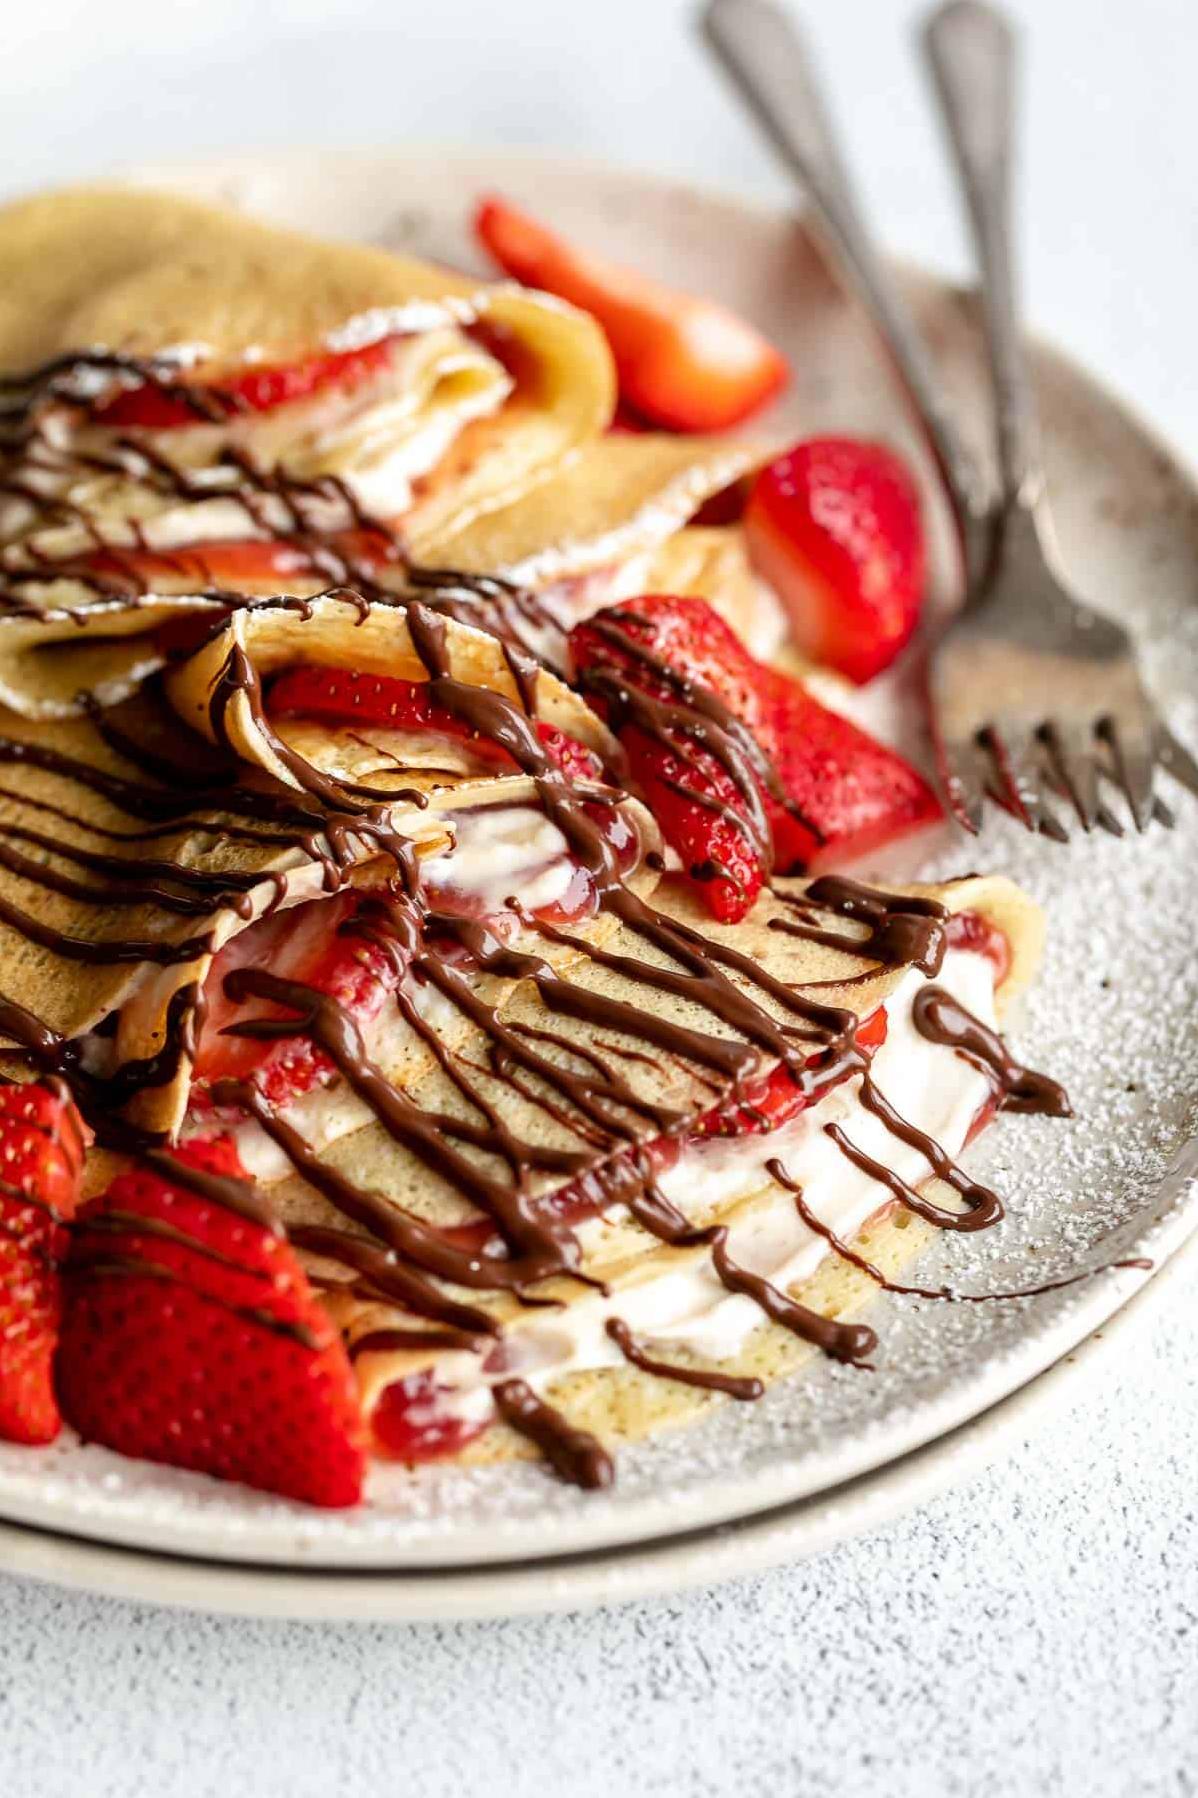  These crepes are also great for dessert! Try filling them with some warm Nutella and sliced bananas.